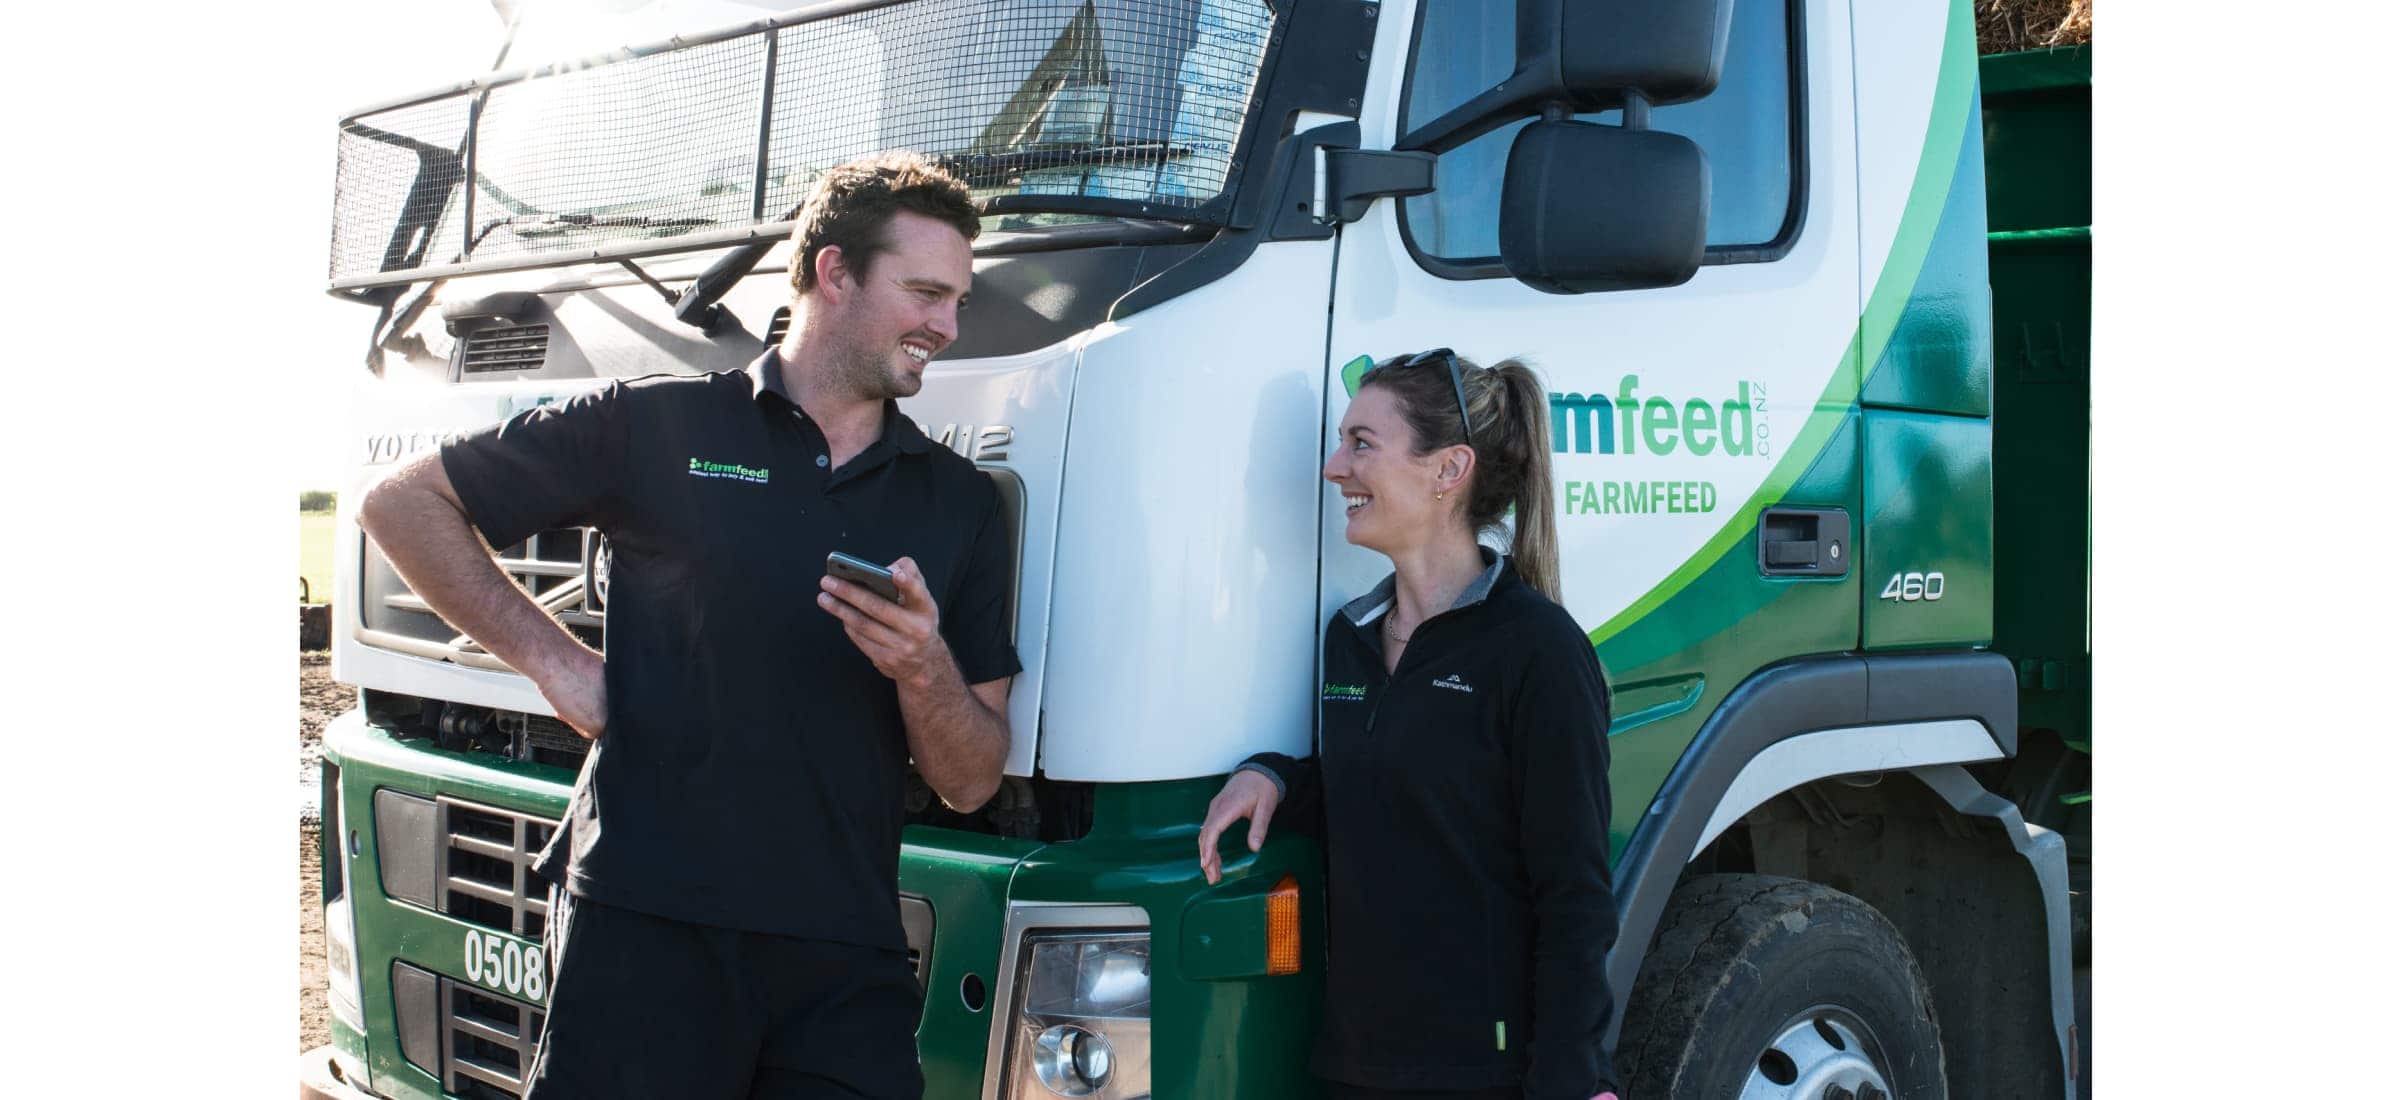 Simon Washer and partner Monica chatting in front of a Farmfeed truck.